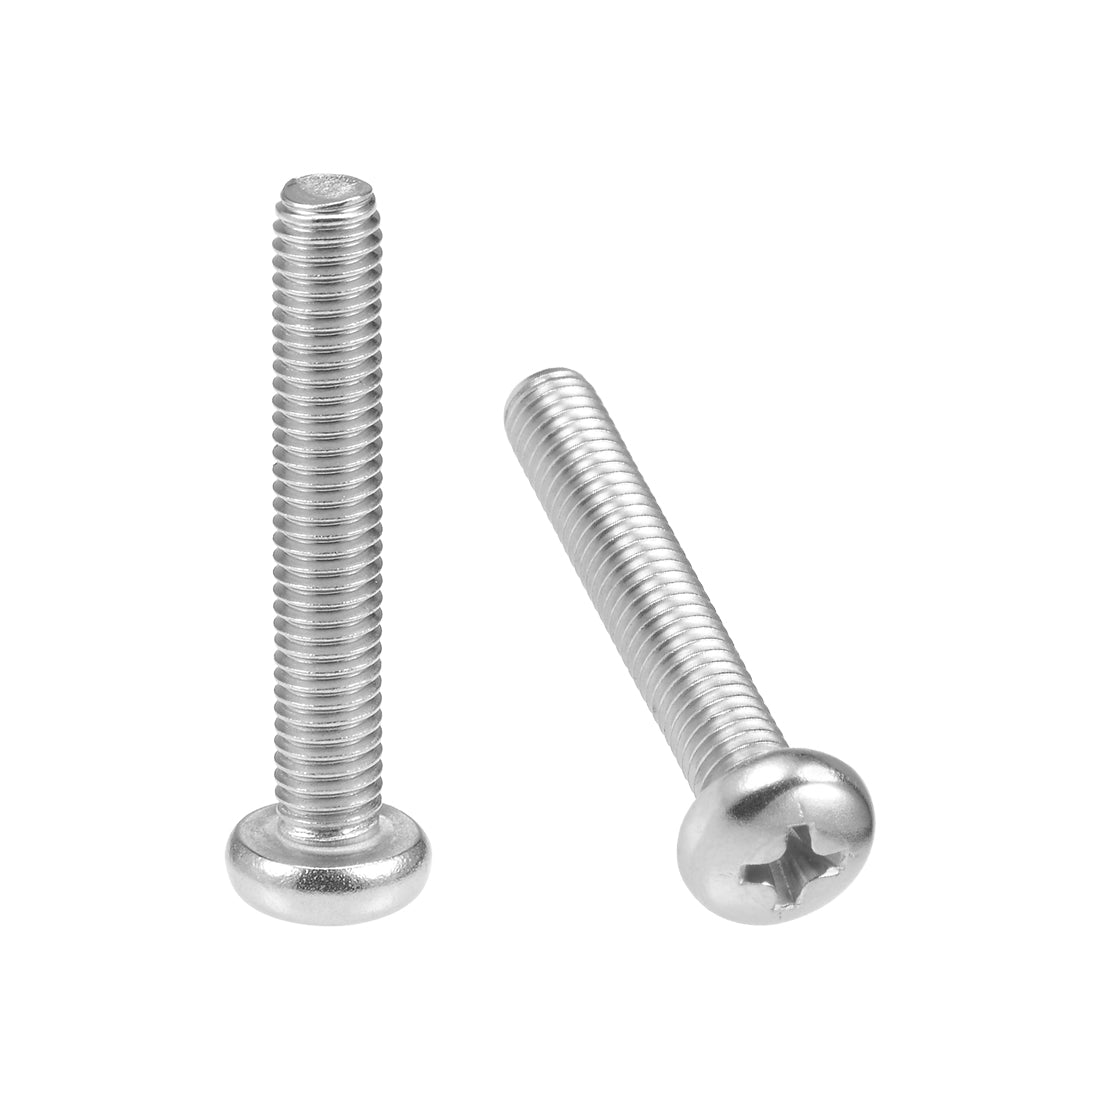 uxcell Uxcell Machine Screws Phillips Cross Screw 304 Stainless Steel Fasteners Bolts, 30Pcs